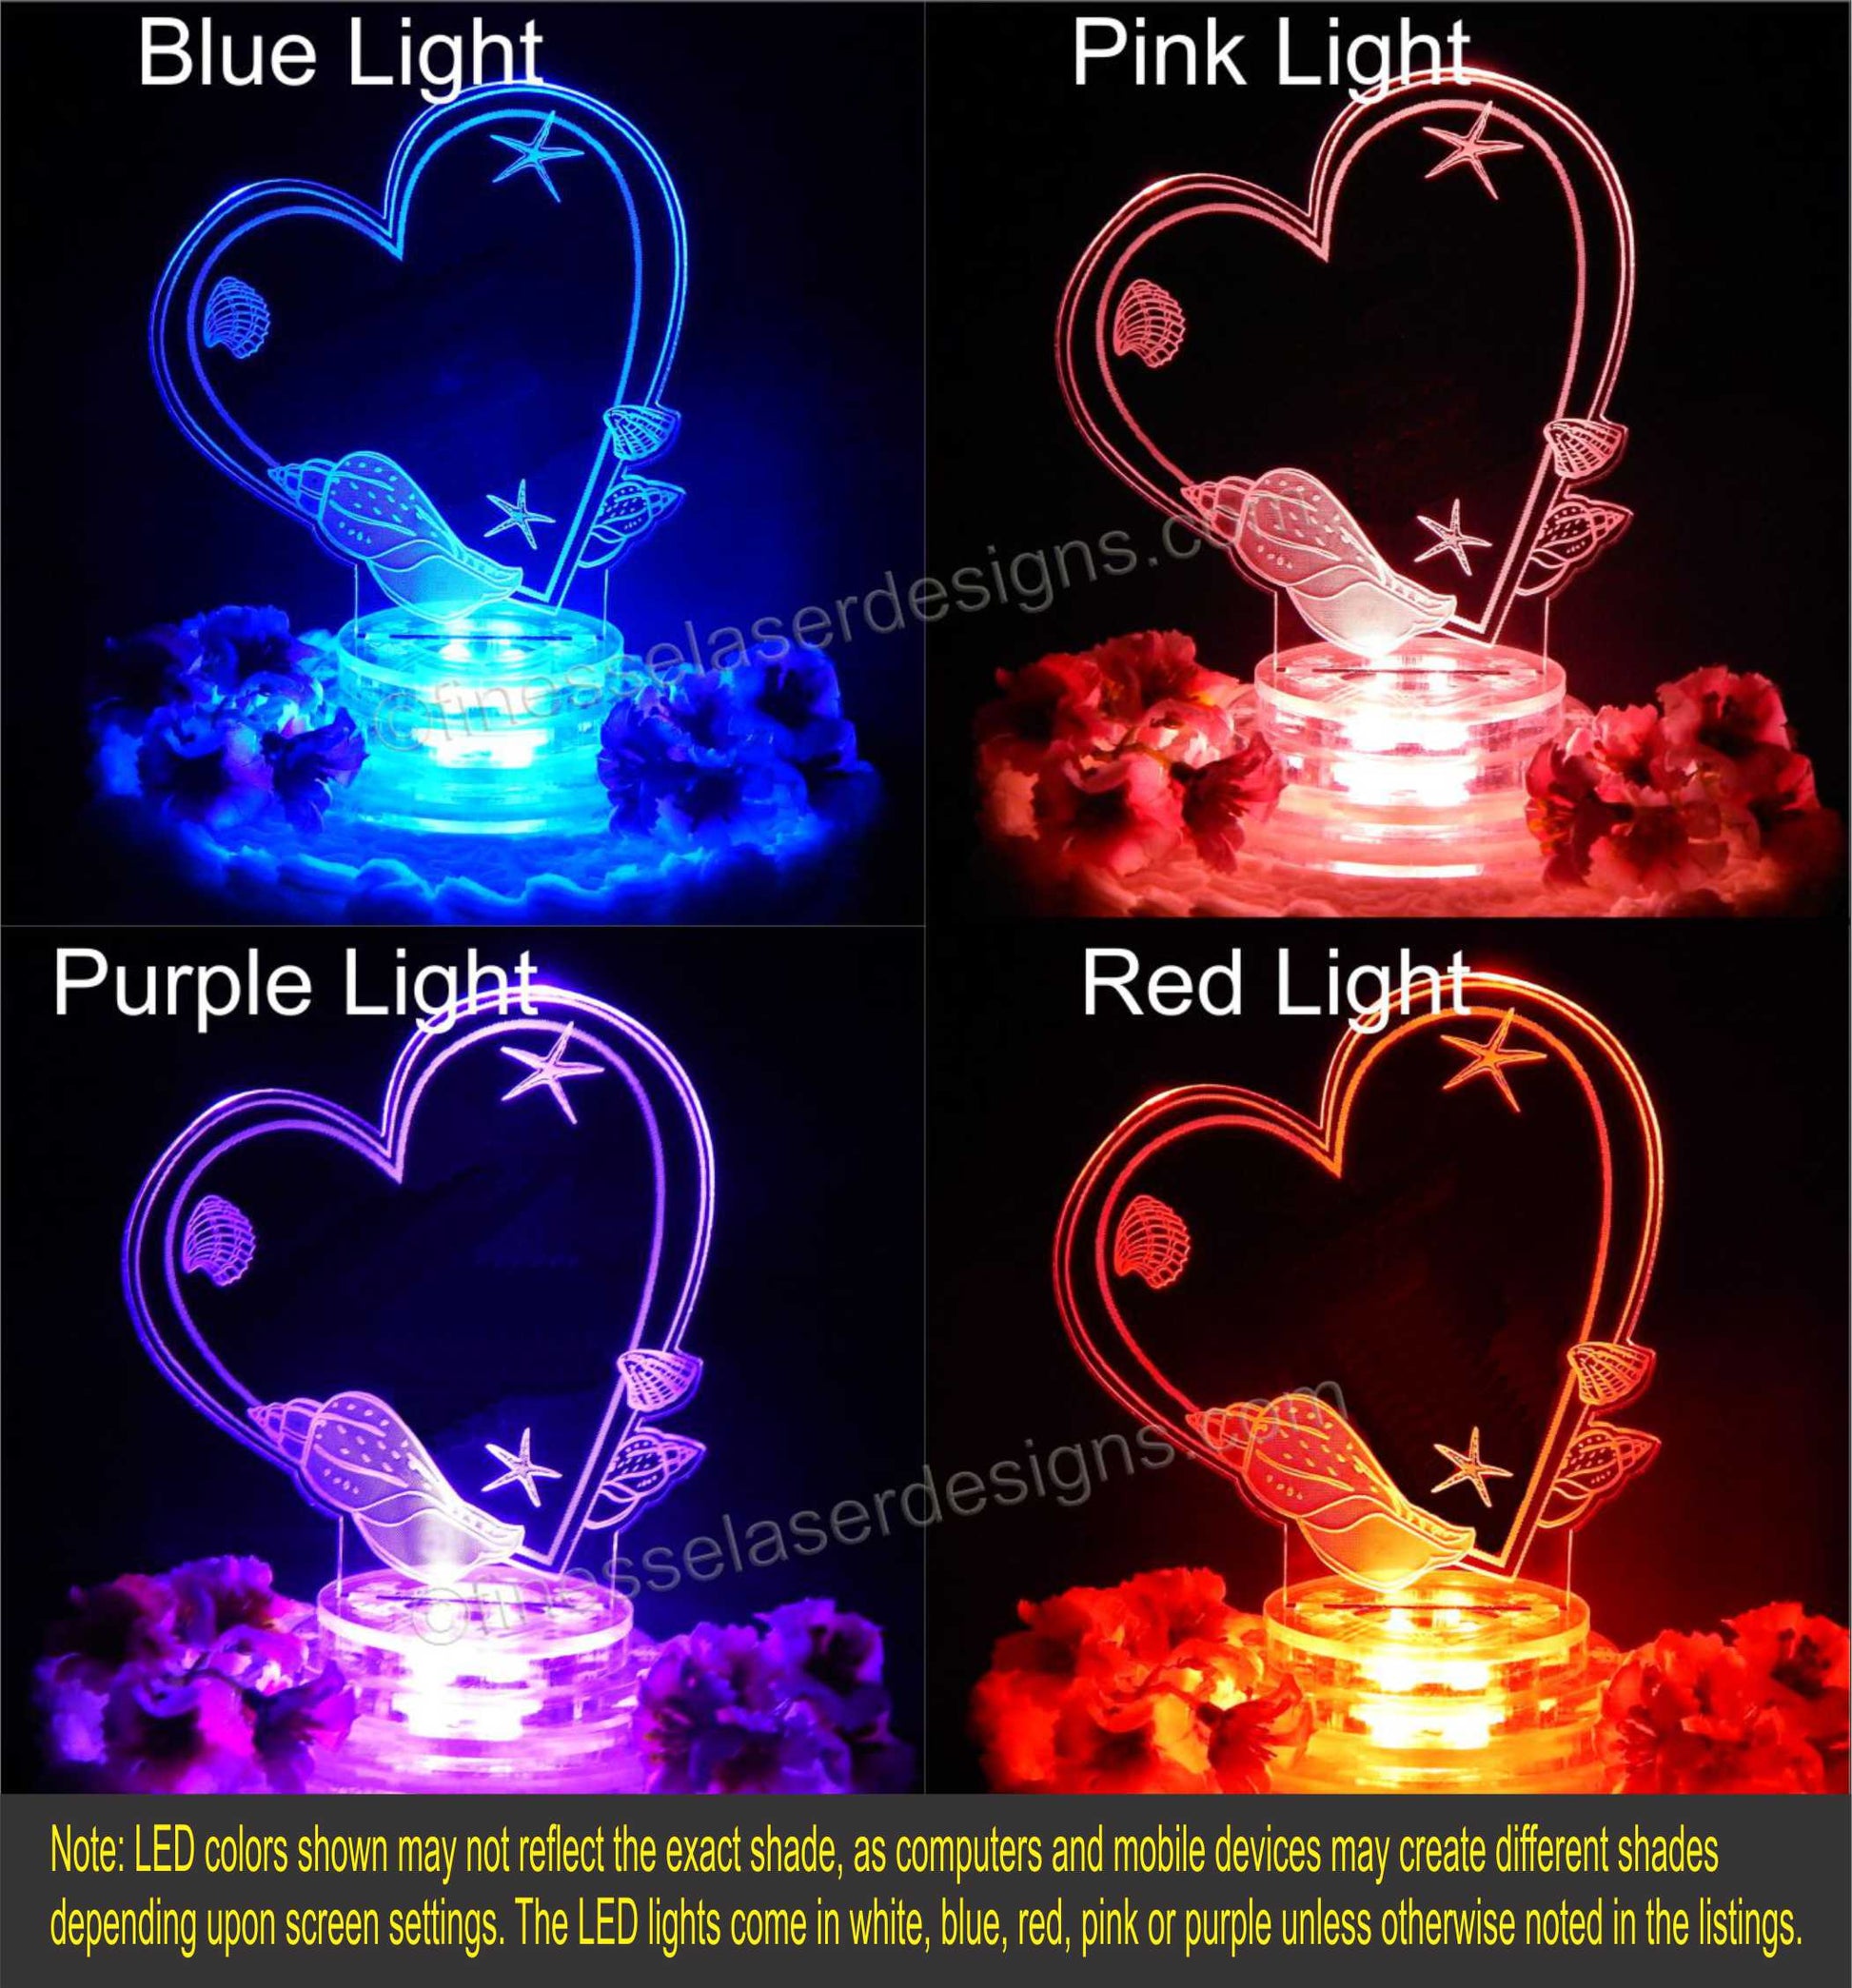 Colored views of acrylic heart shaped cake topper designed with a seashell design showing pink, purple, blue, and red lighted views